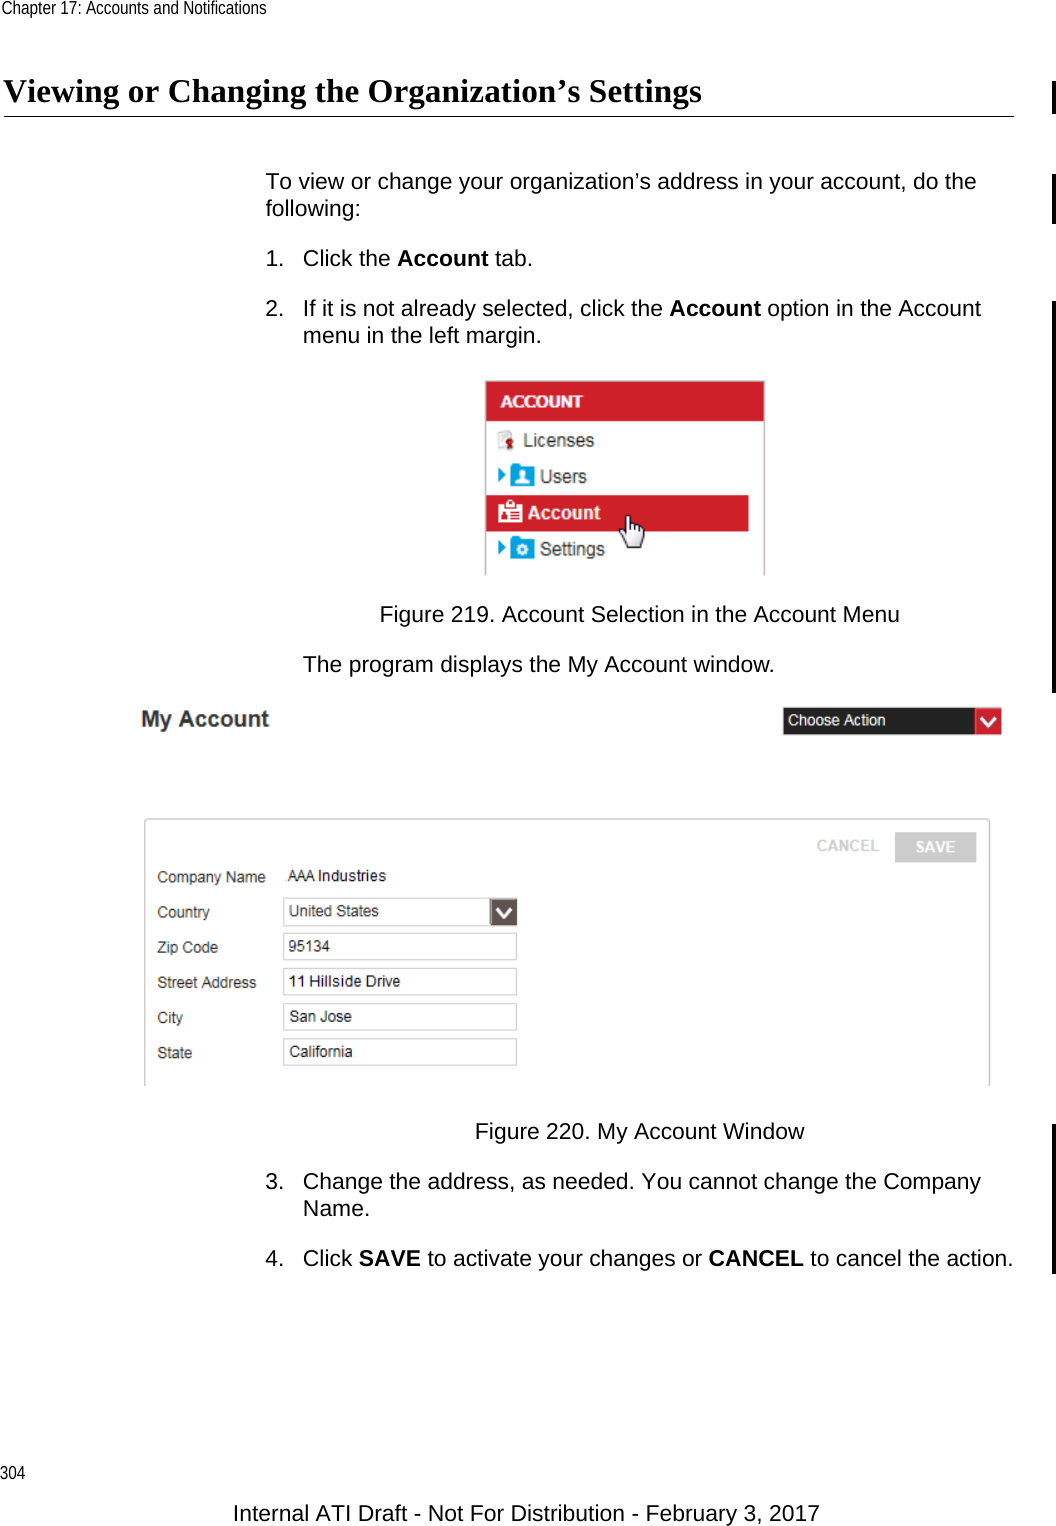 Chapter 17: Accounts and Notifications304Viewing or Changing the Organization’s SettingsTo view or change your organization’s address in your account, do the following:1. Click the Account tab.2. If it is not already selected, click the Account option in the Account menu in the left margin.Figure 219. Account Selection in the Account MenuThe program displays the My Account window.Figure 220. My Account Window3. Change the address, as needed. You cannot change the Company Name.4. Click SAVE to activate your changes or CANCEL to cancel the action.Internal ATI Draft - Not For Distribution - February 3, 2017